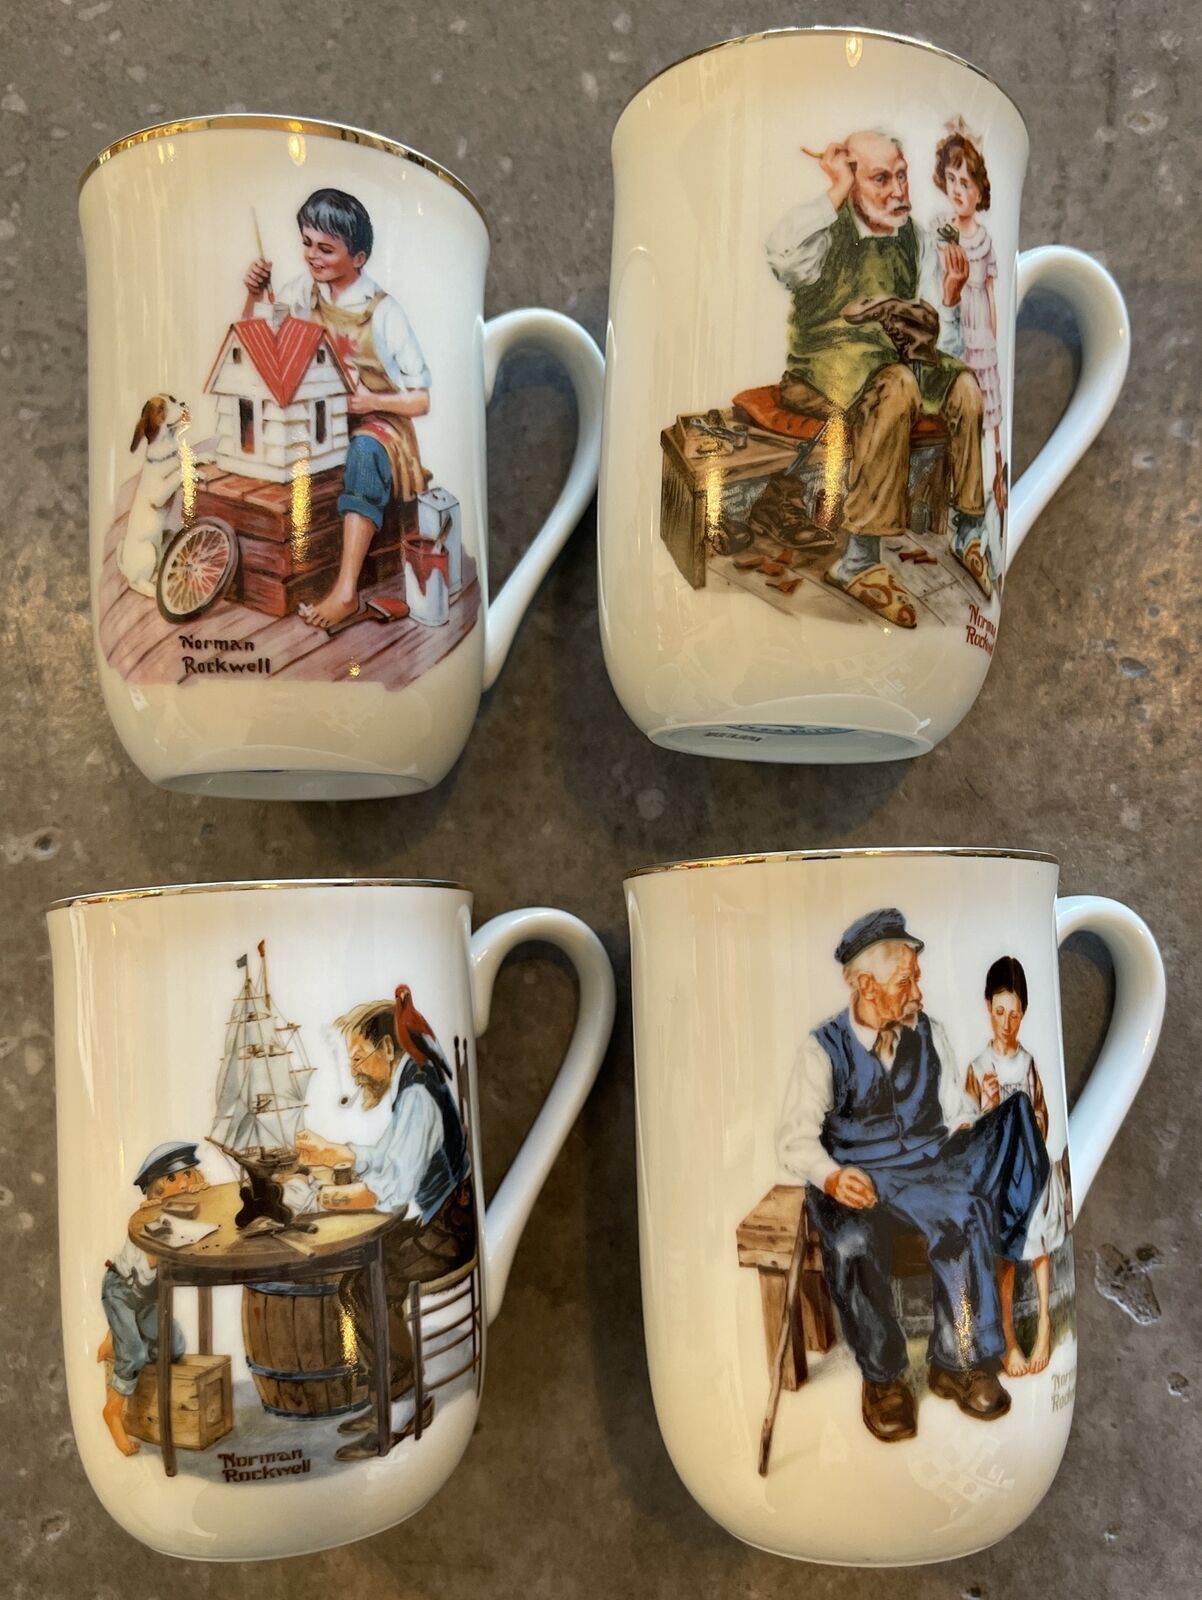 x4 Vintage 1982 Norman Rockwell Museum Seal of Authenticity Mug Children Toys